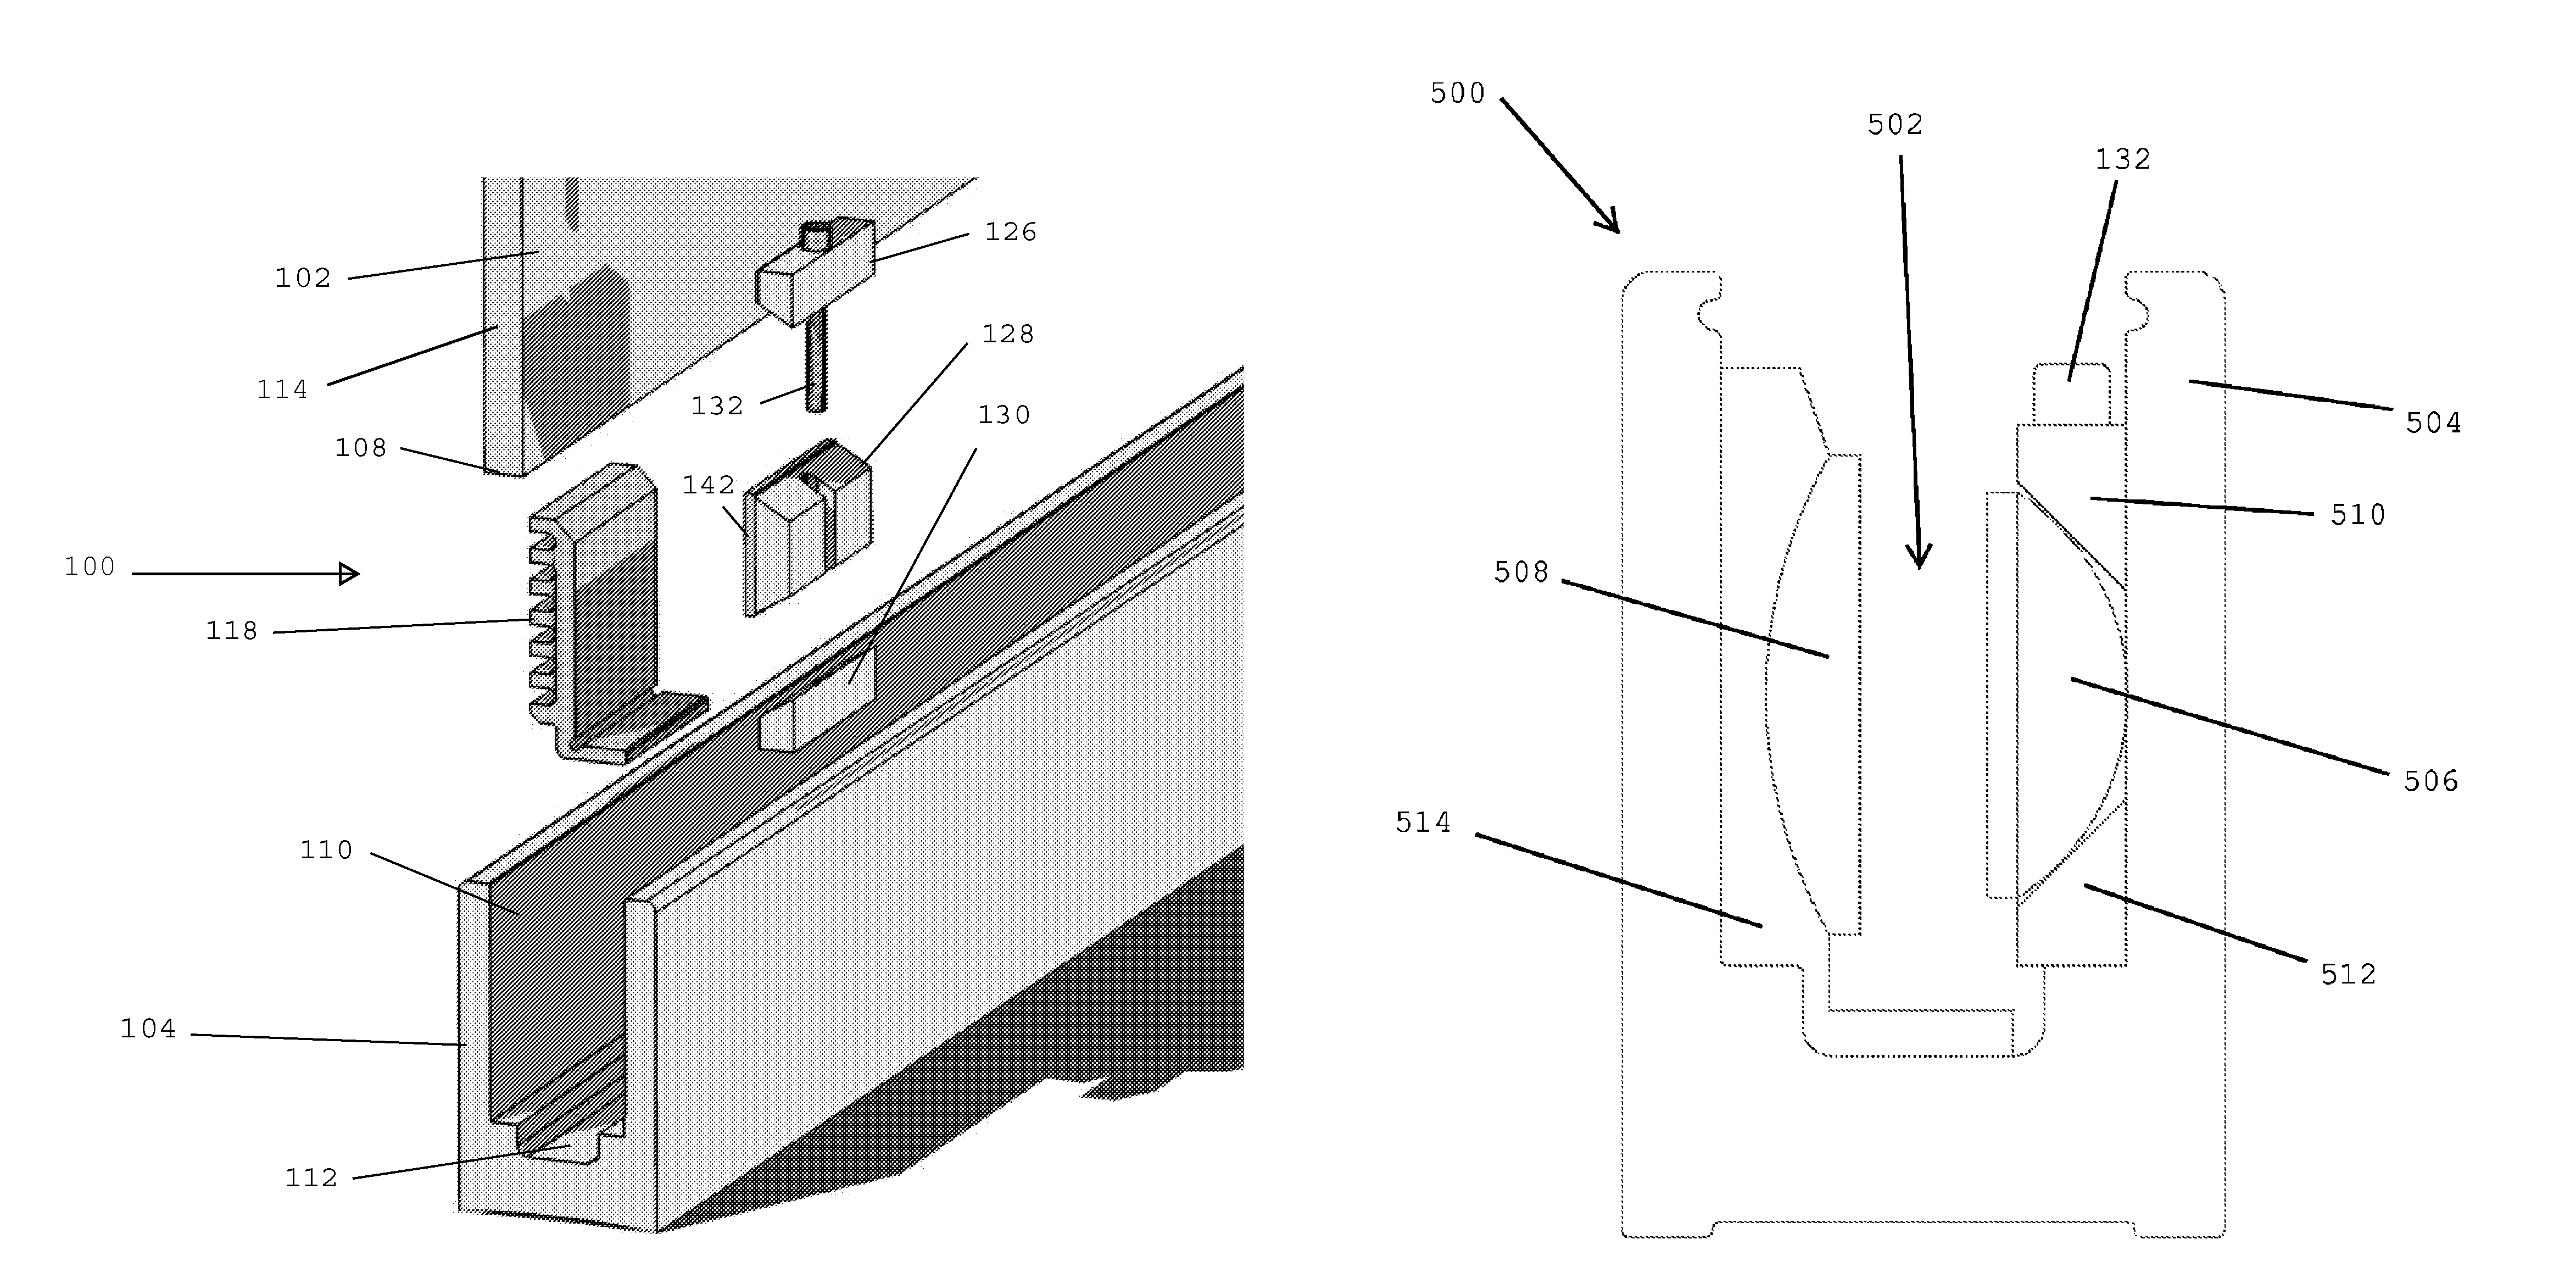 Partition mounting system and clamp assembly for mounting partition